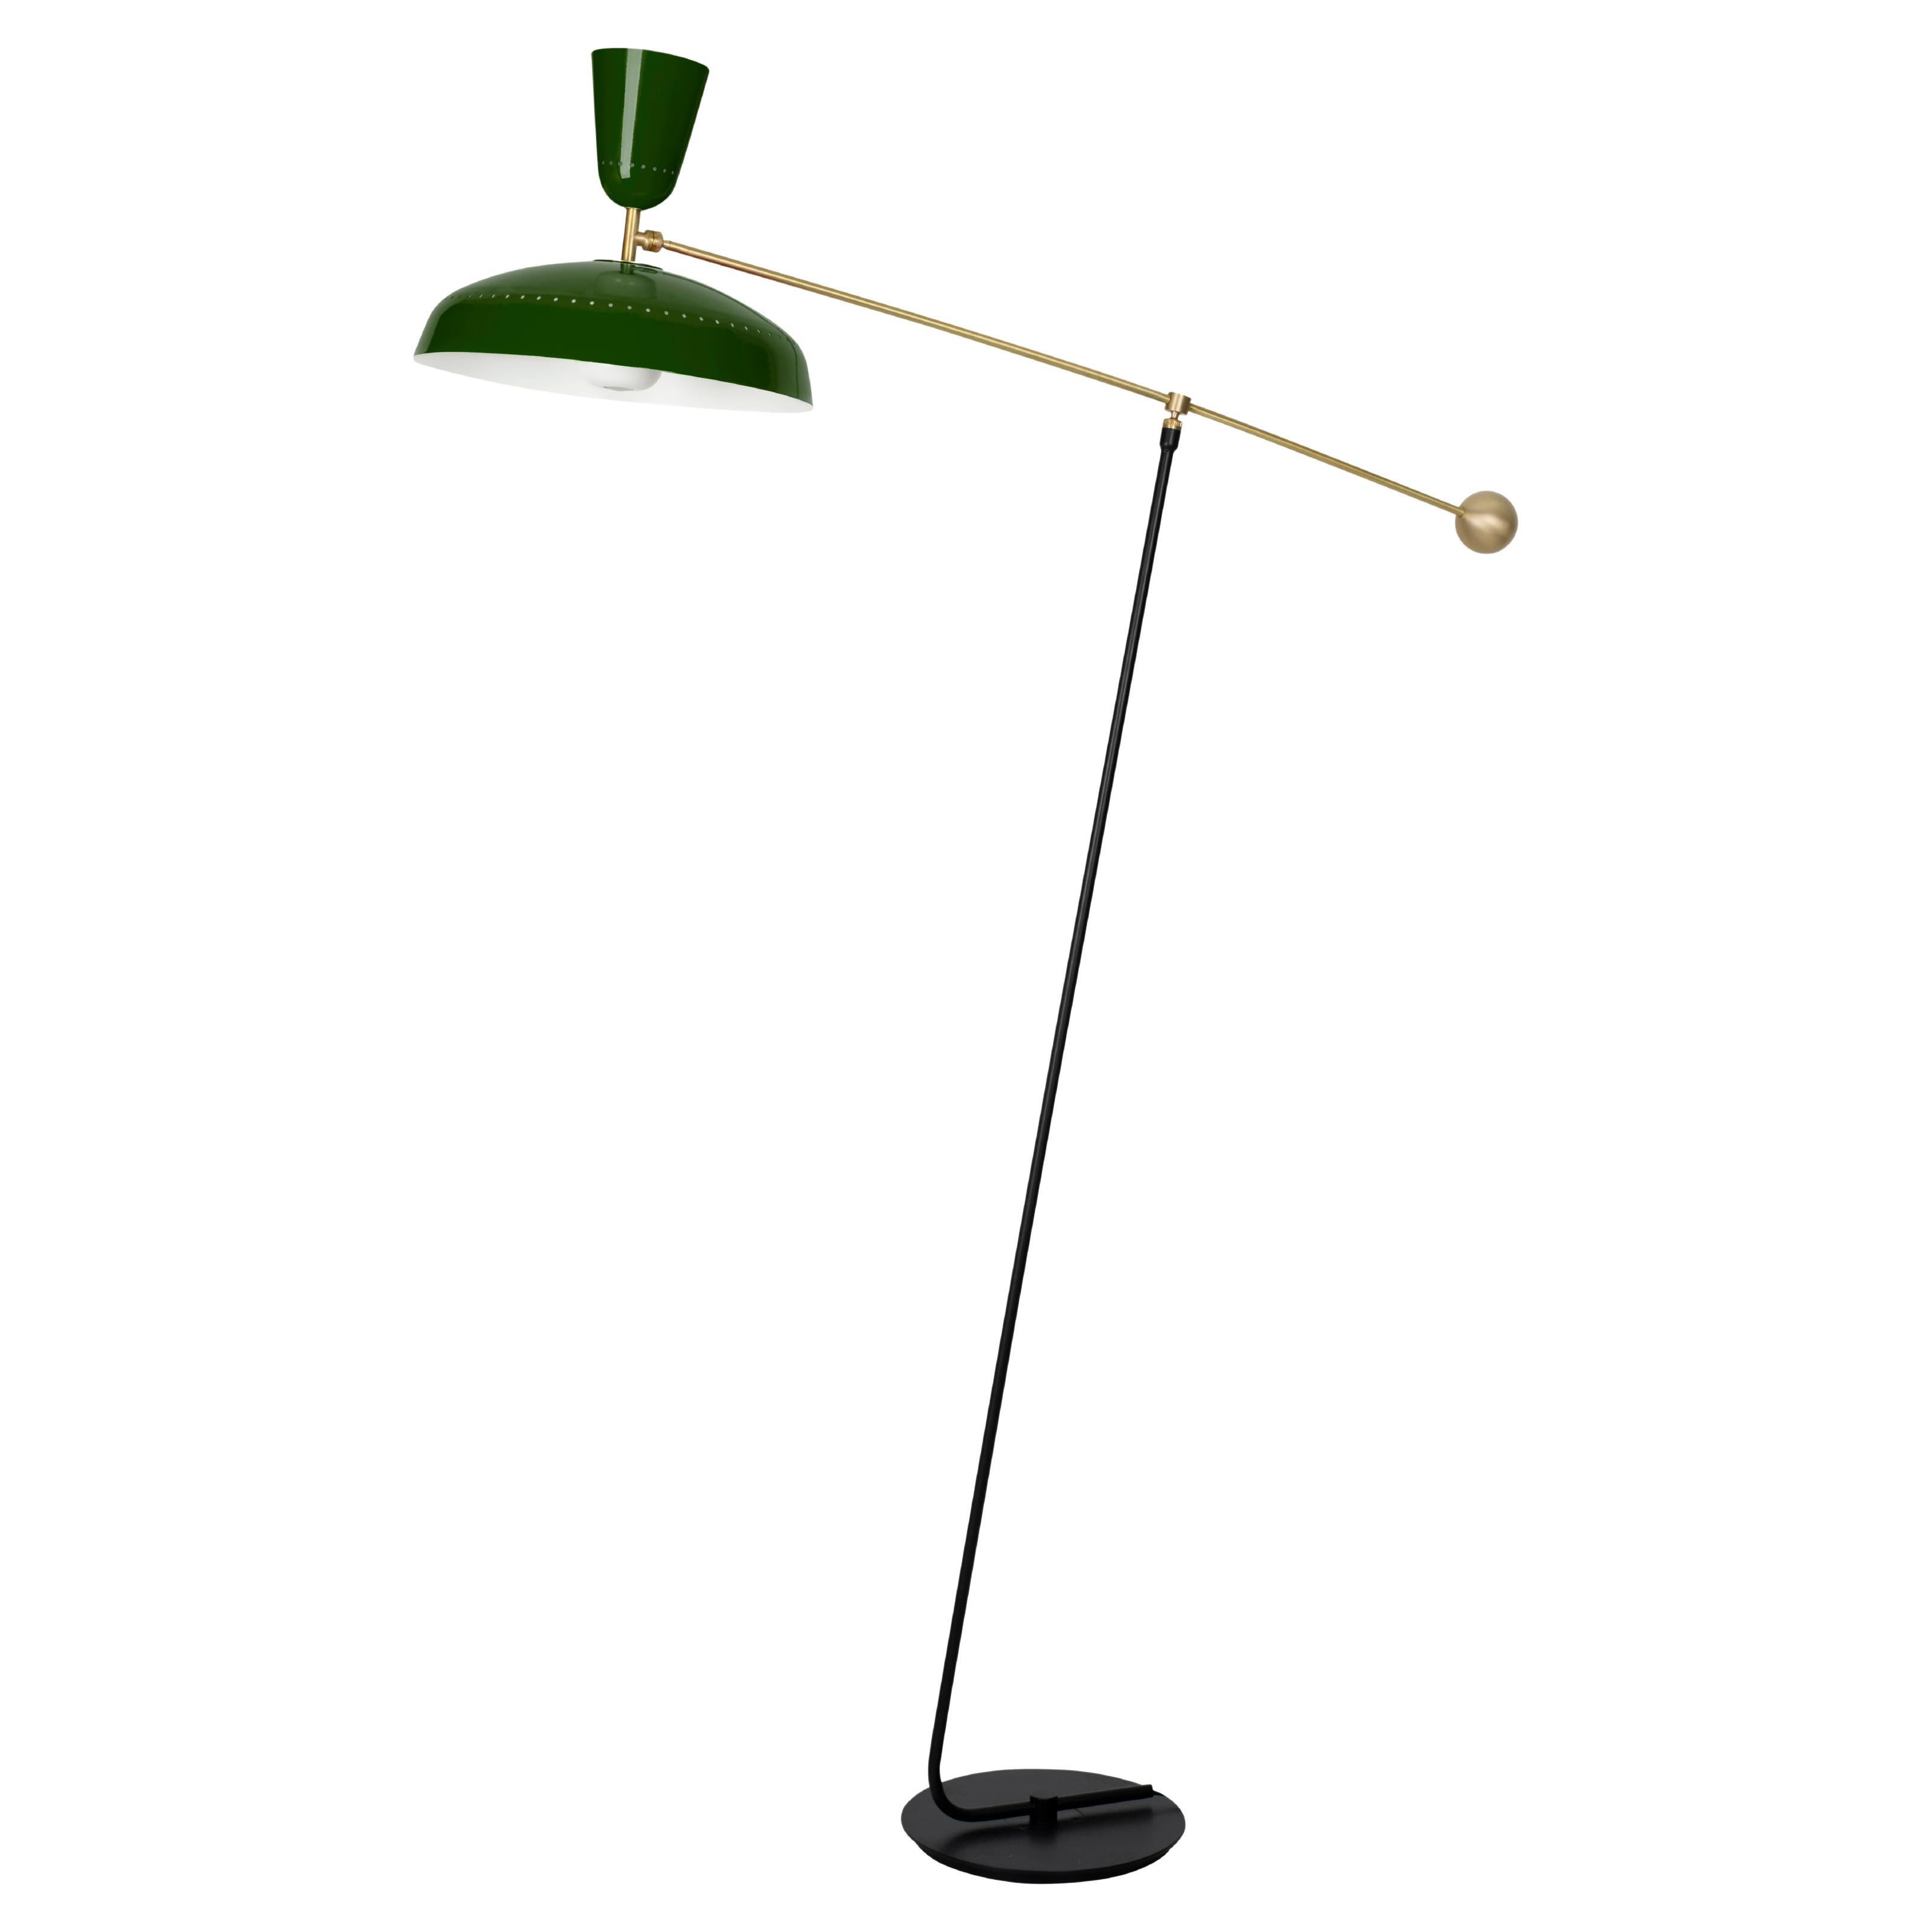 Large Pierre Guariche 'G1' Floor Lamp for Sammode Studio in Green